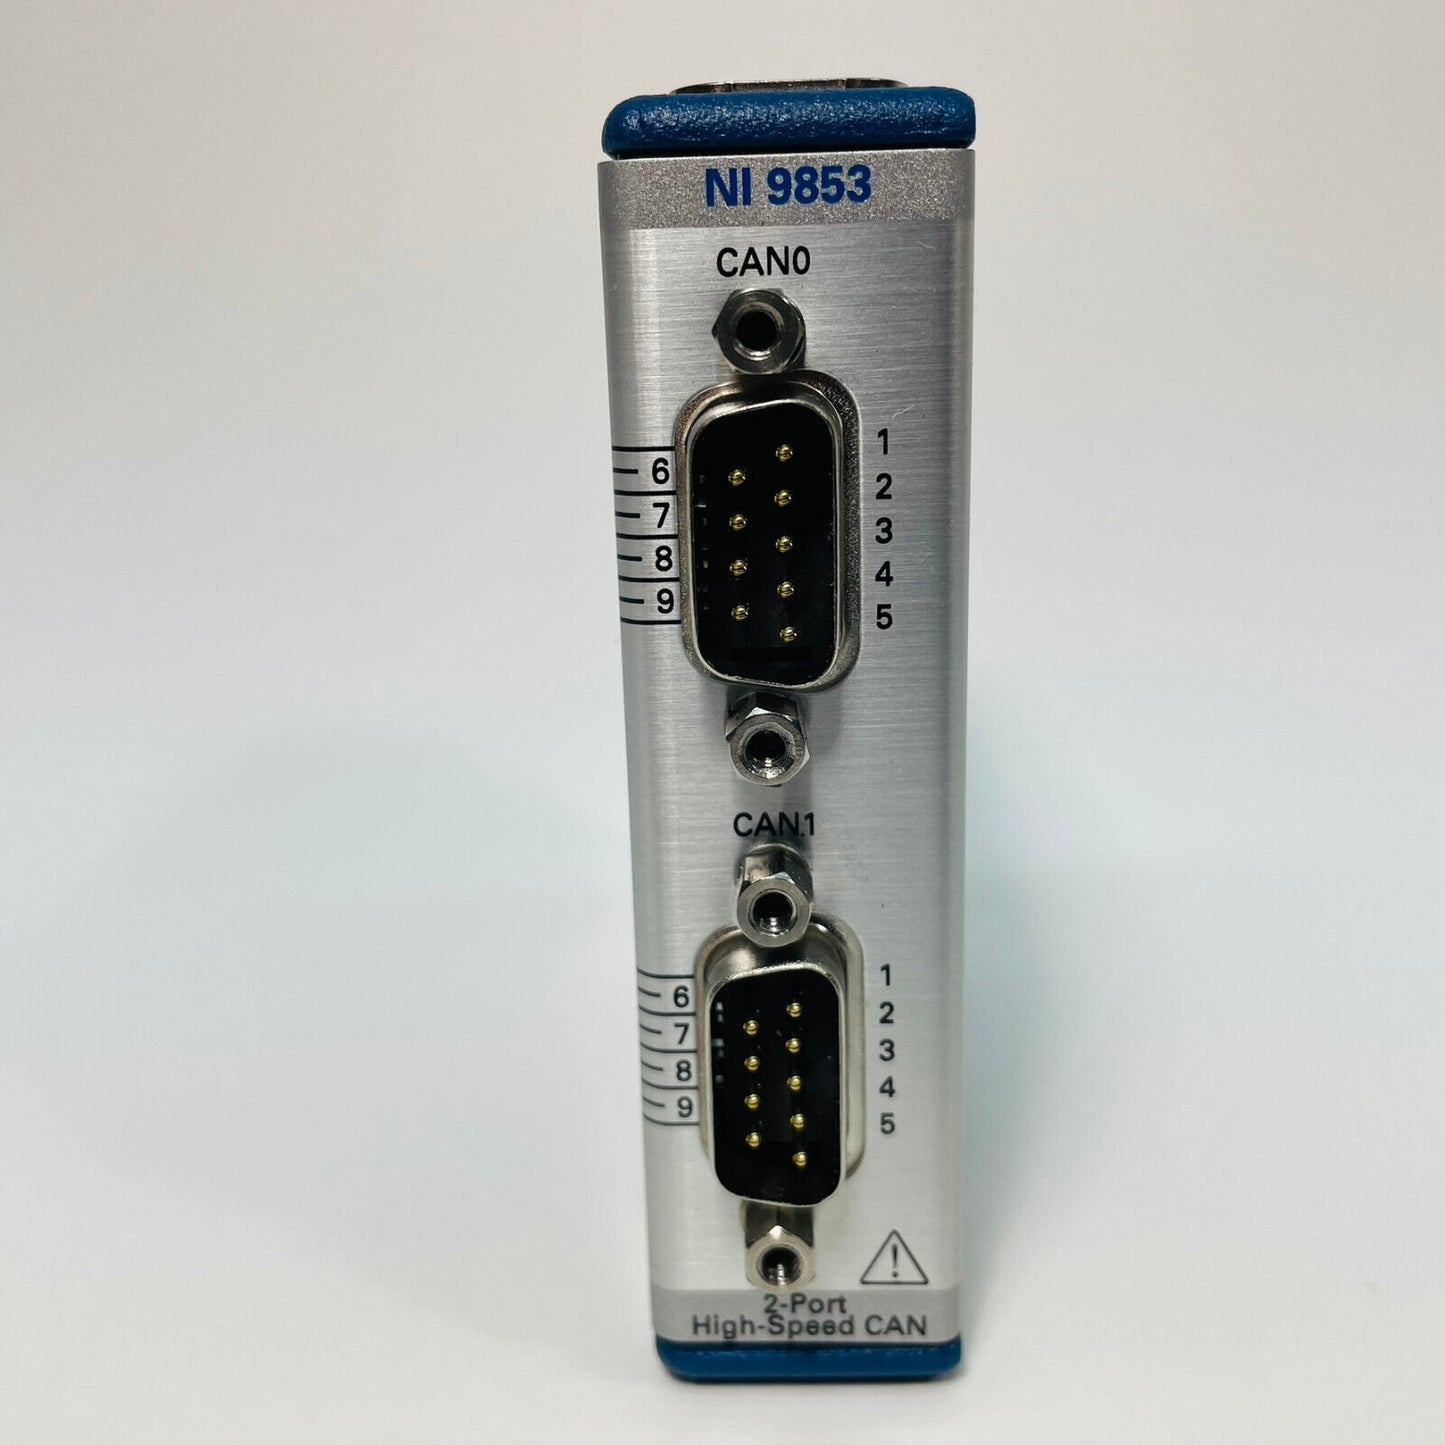 National Instruments NI 9853 2-Port High-Speed CAN Module, 779429-01